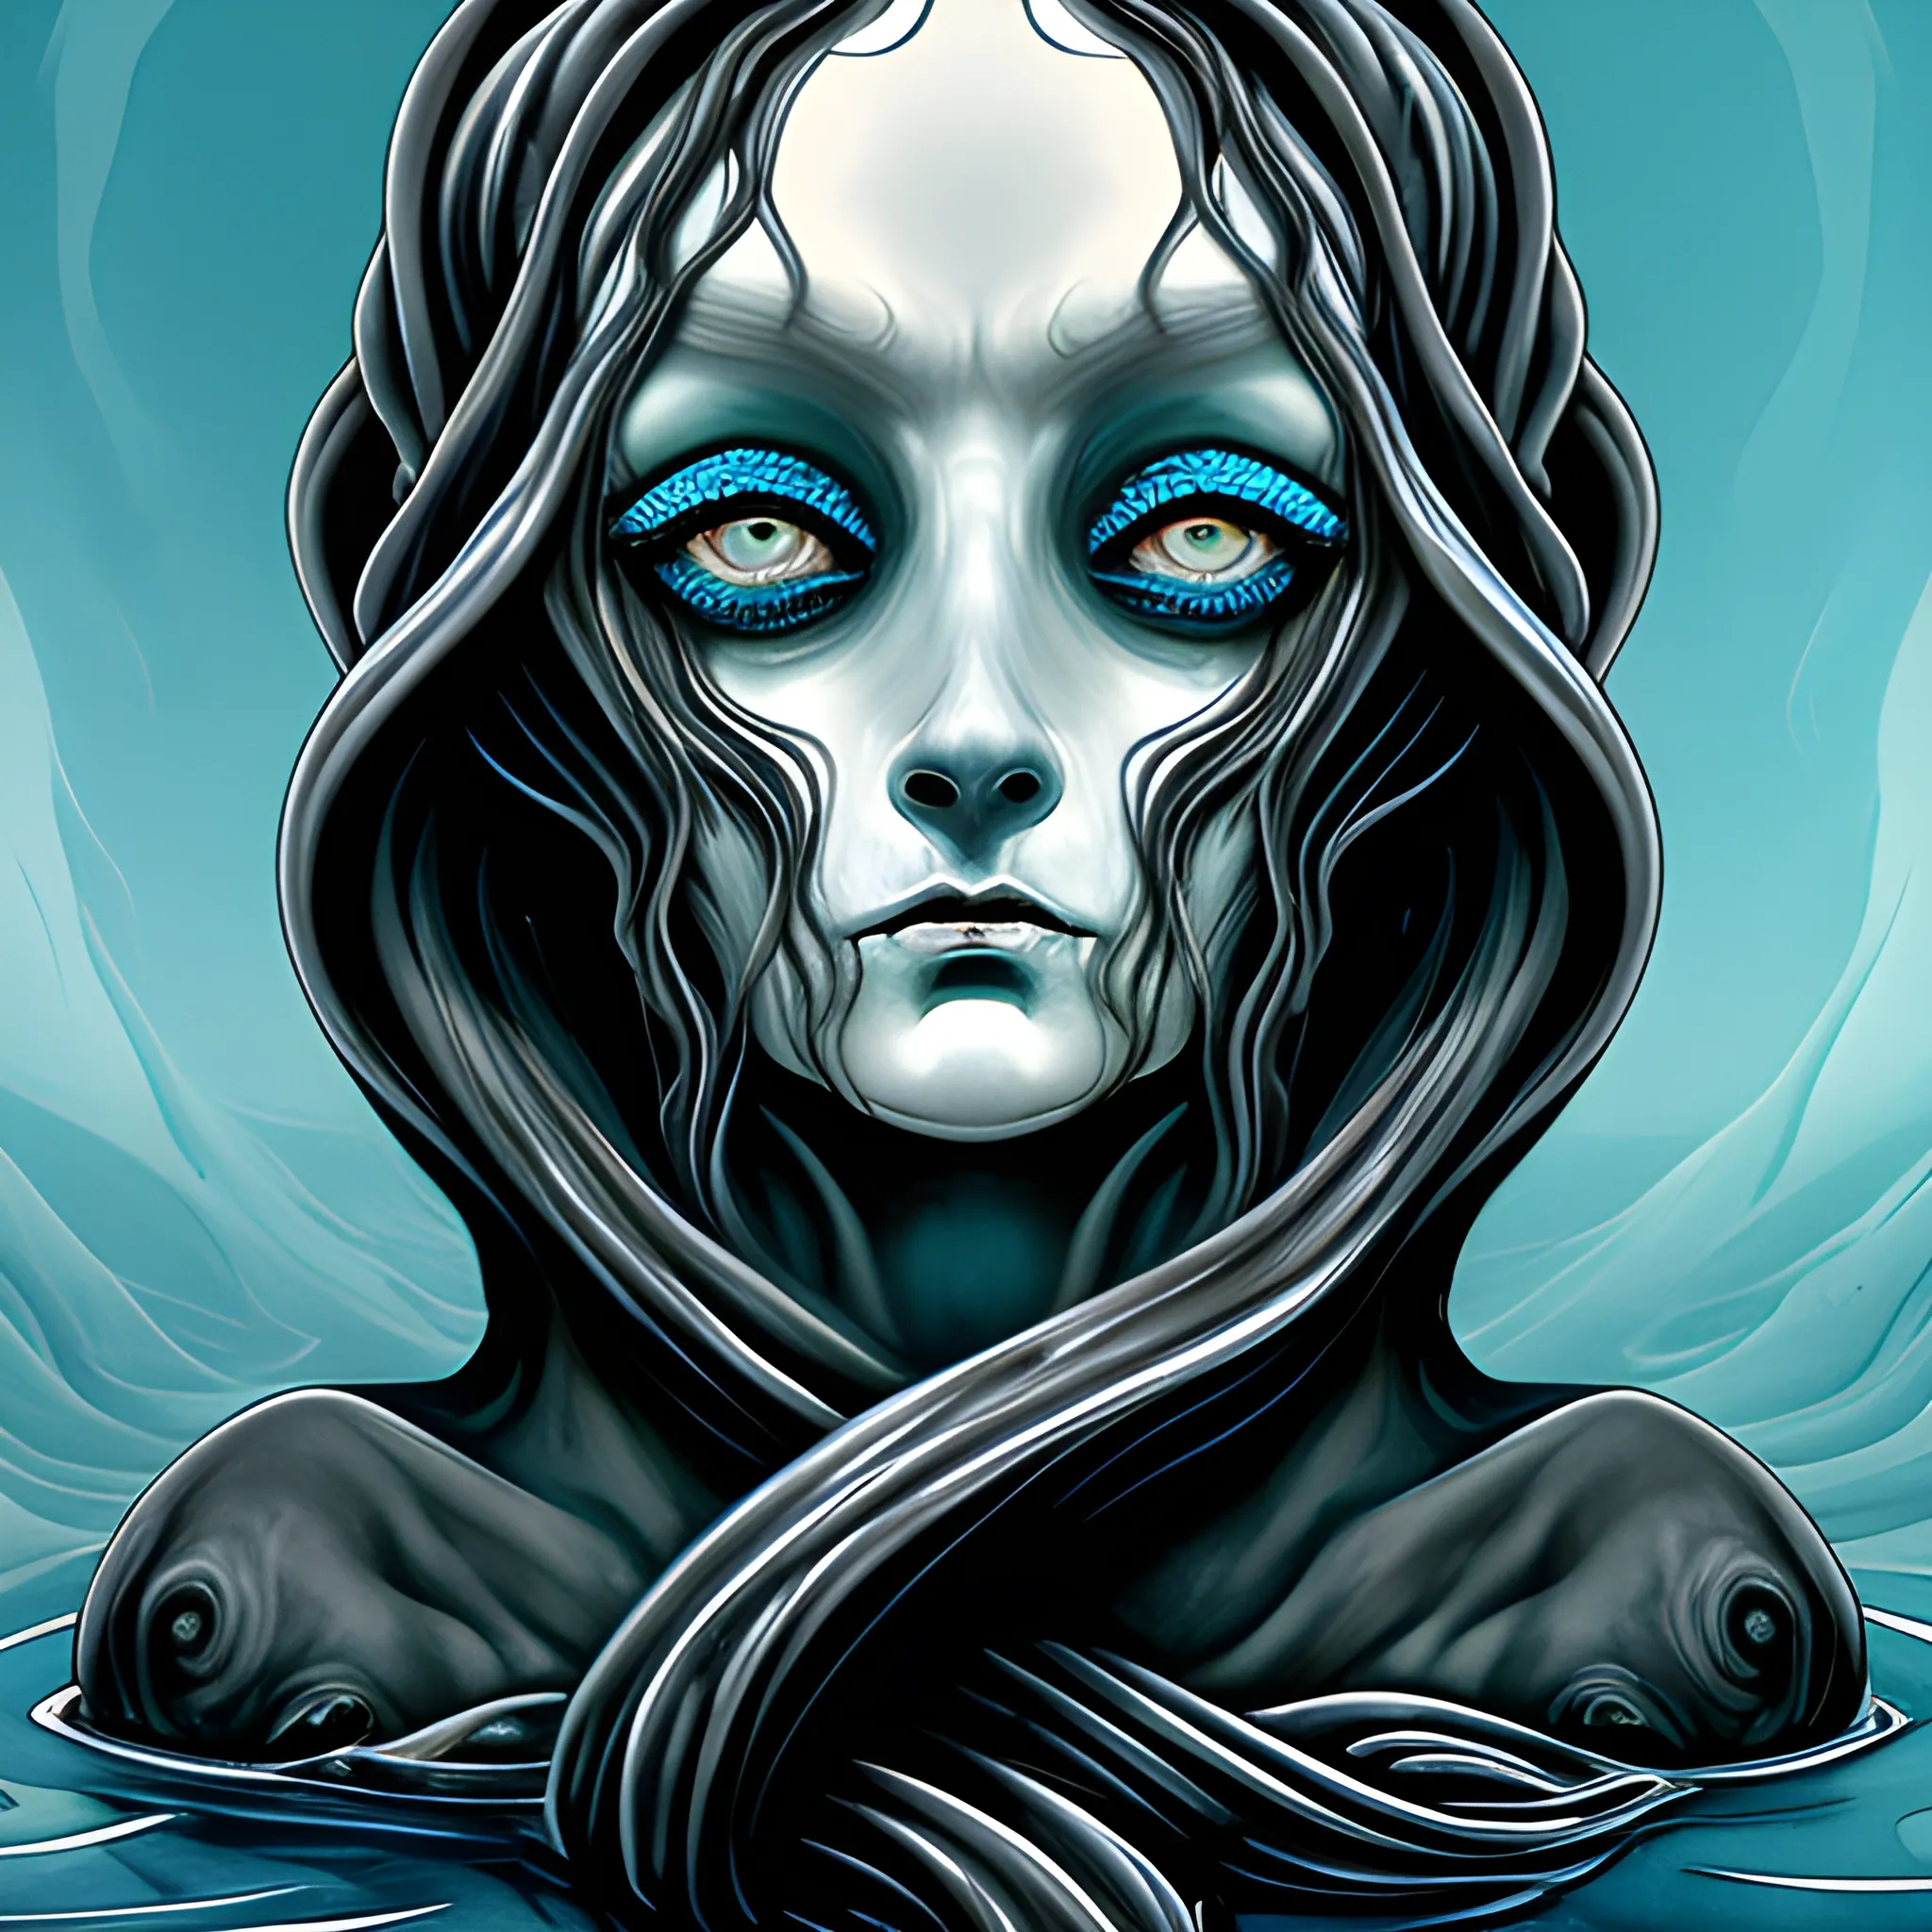 Sketch, a pale, tentacled face rising from the inky black depths, with flowing ebony hair and eyes the crystalline blue of the Aegean Sea, its beautiful yet cruel features twisted with divine rage, in the style of surrealism